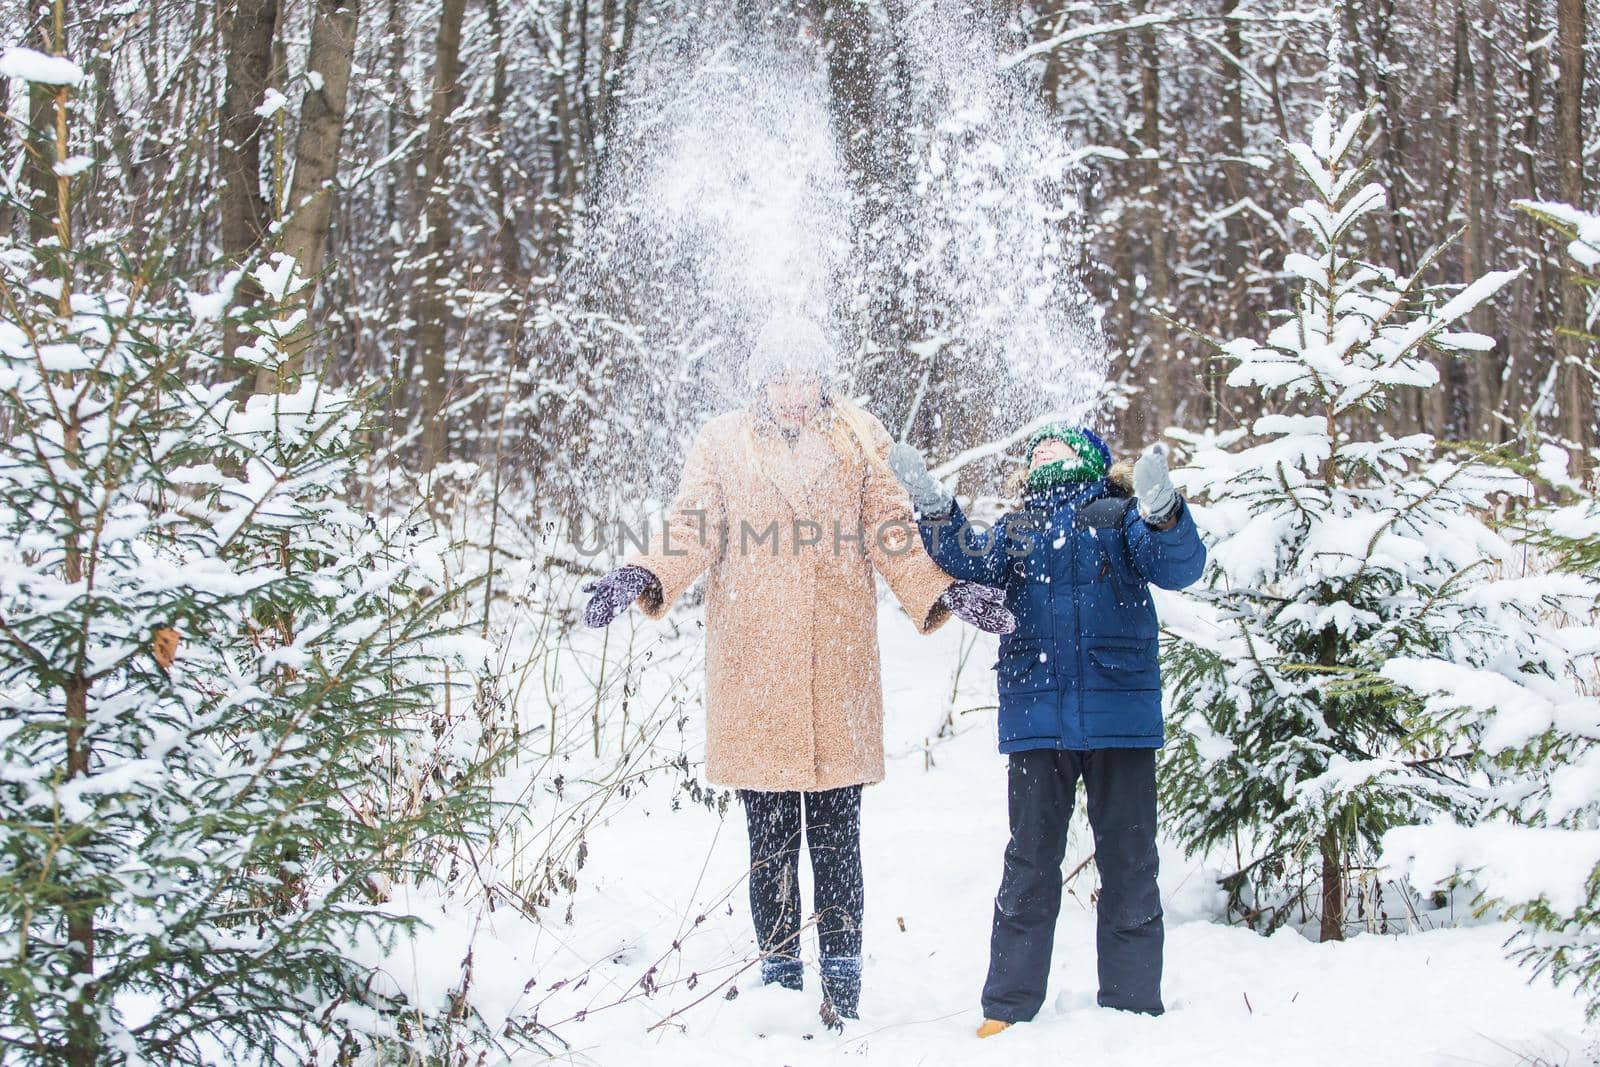 Parenting, fun and season concept - Happy mother and son having fun and playing with snow in winter forest.